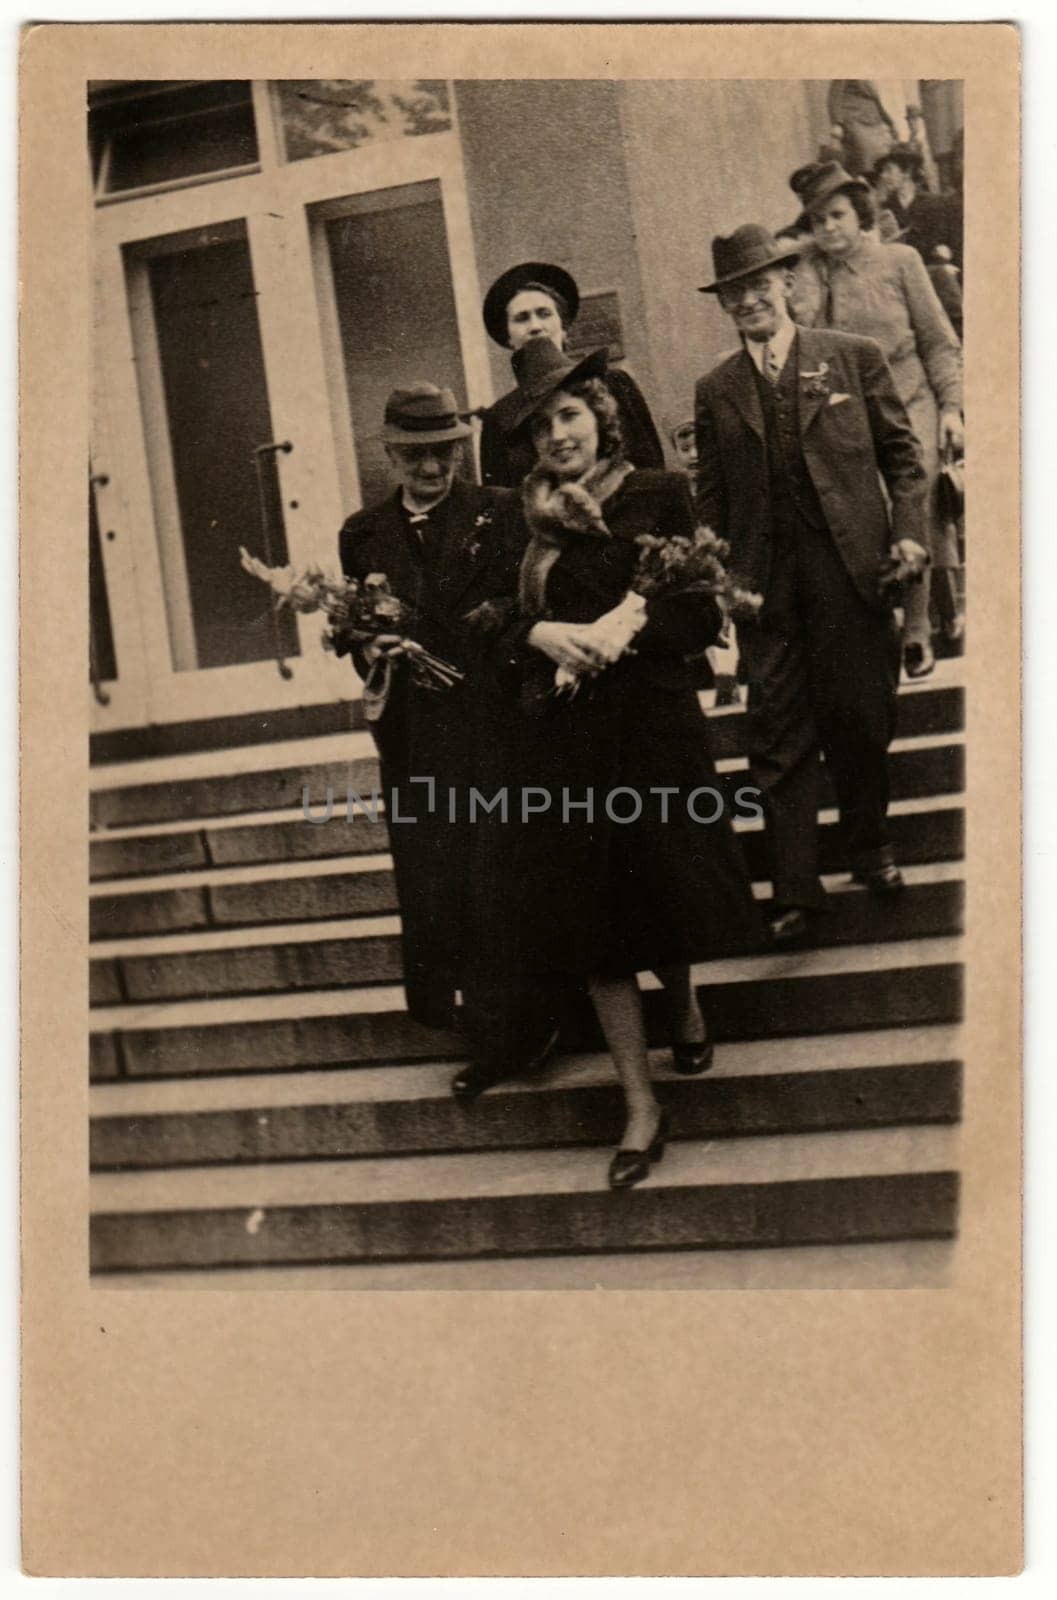 THE CZECHOSLOVAK REPUBLIC - CIRCA 1946: Vintage photo shows people go from wedding ceremony. Retro black and white photography. Circa 1950s.